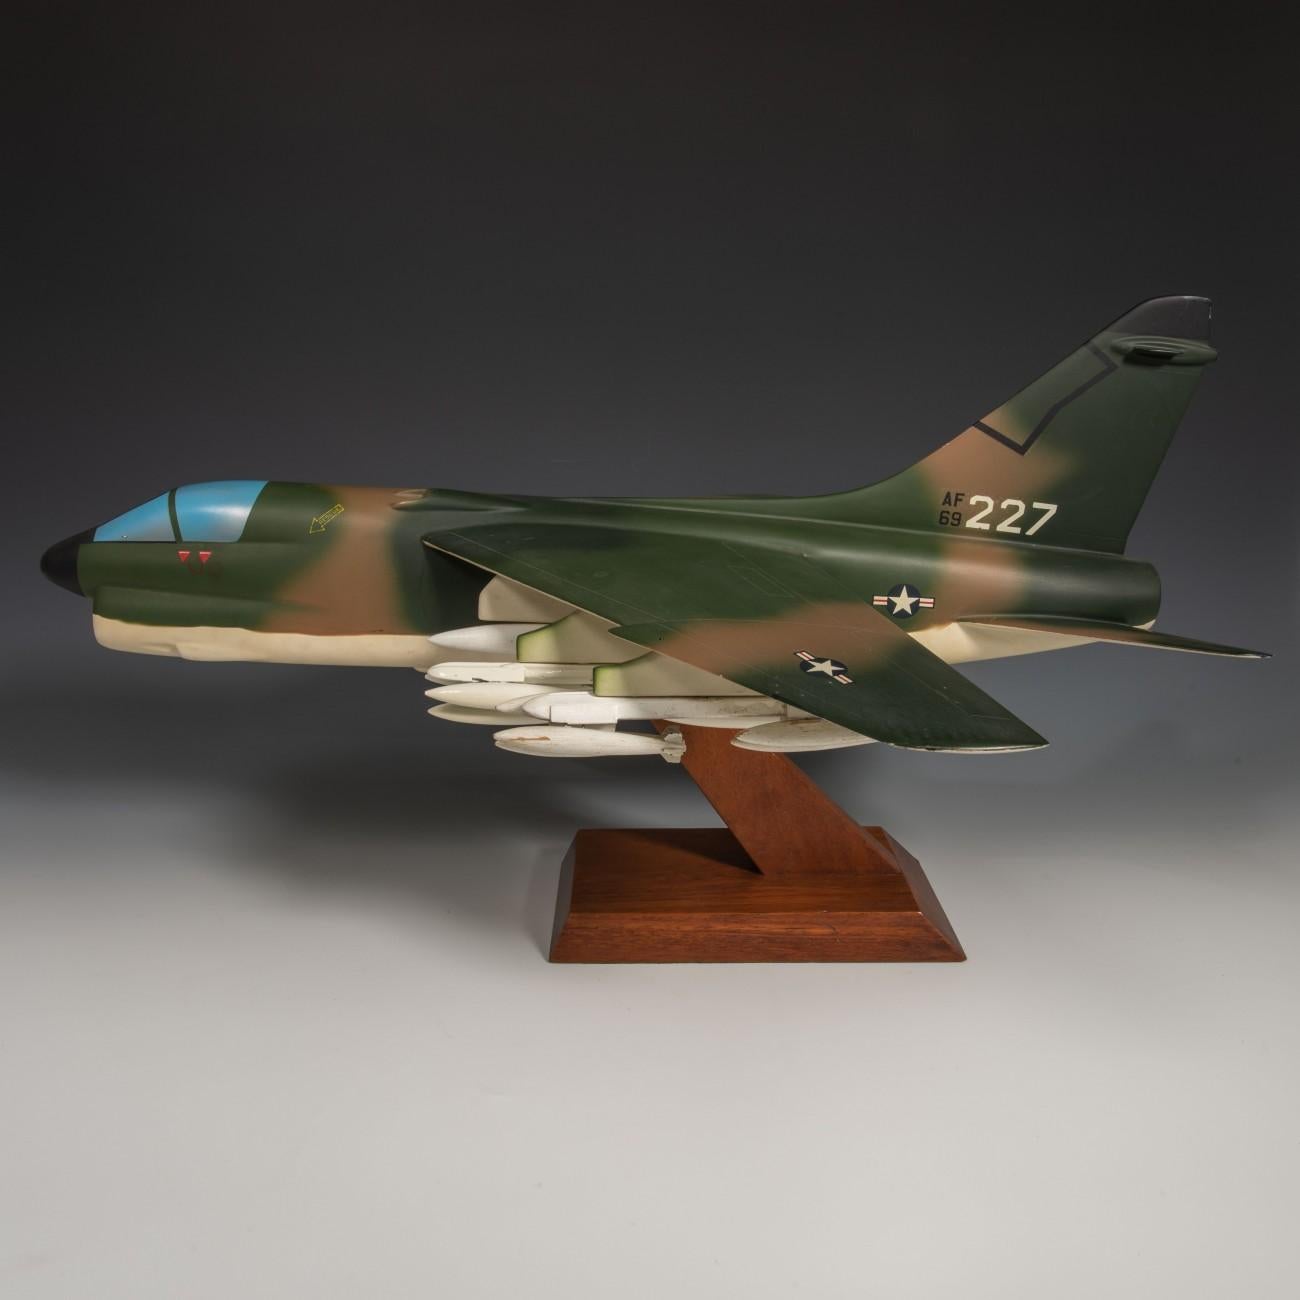 An exceptional painted aluminium and wood military model of the LTV ( Ling-Temco-Vought) A-7 Corsair II fighter jet airplane. In United States Air Force camouflage livery. Made by a celebrated Dutch model maker, Maarten Matthijs Verkuyl, a